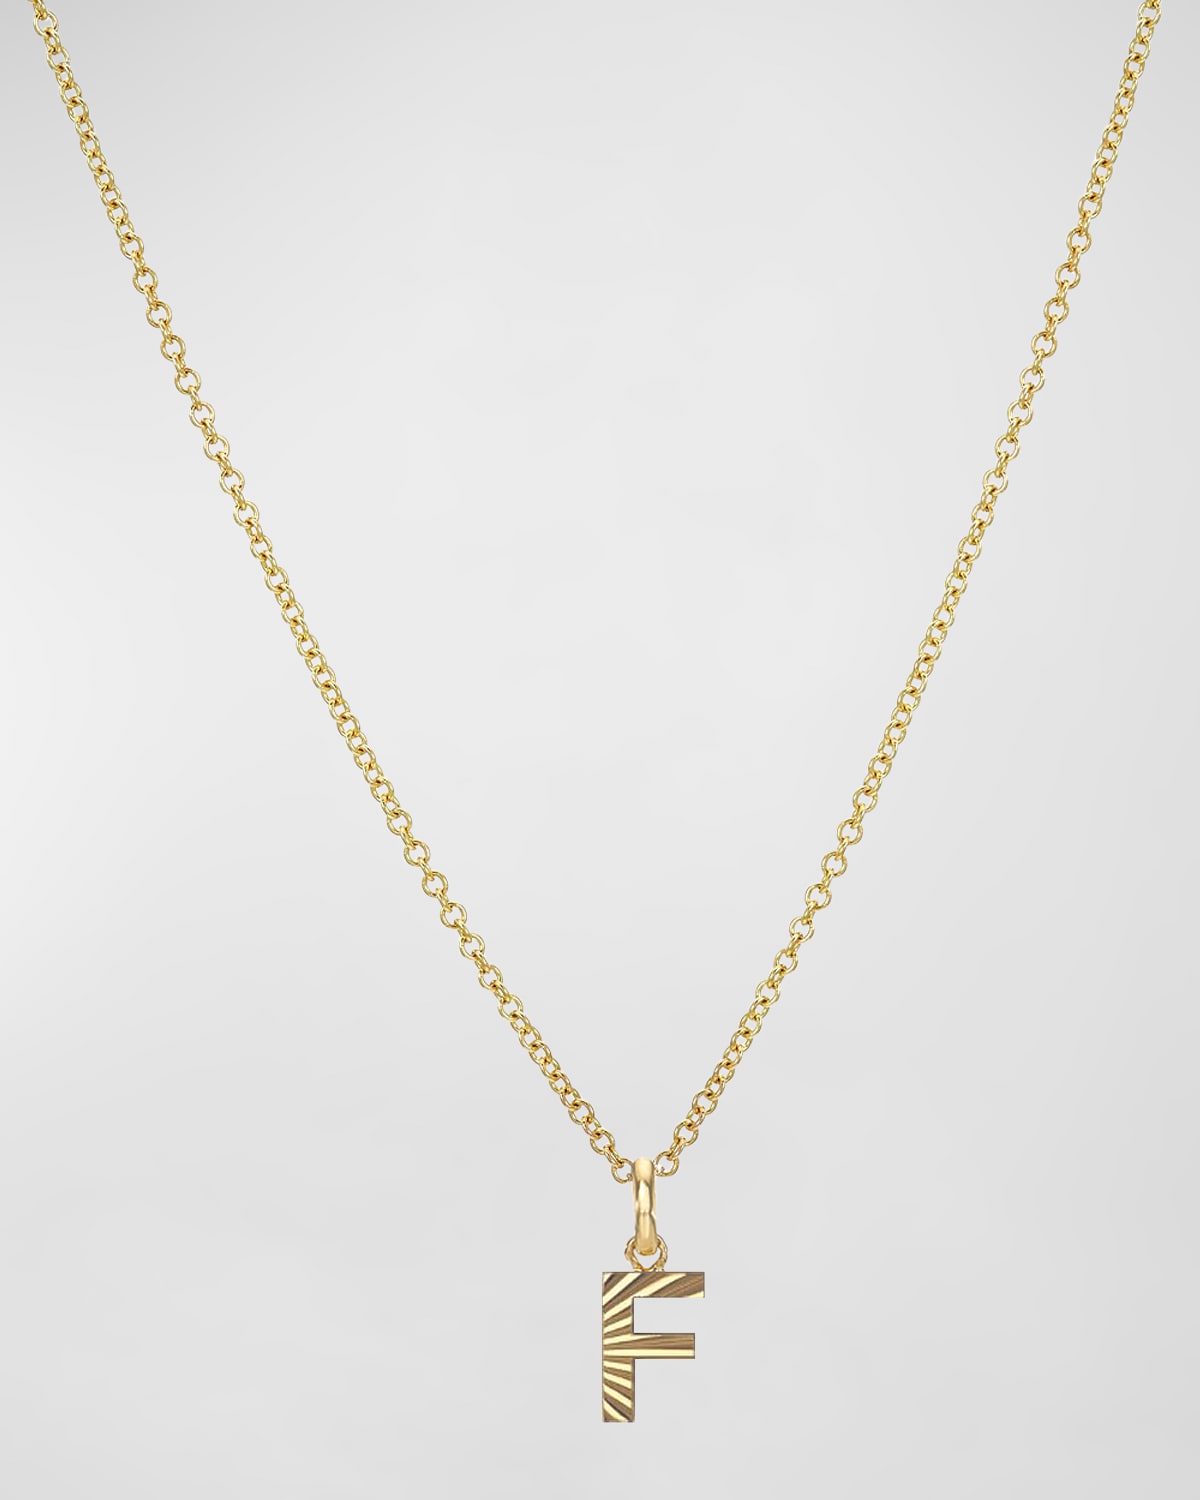 Zoe Lev Jewelry 14k Gold Initial Pendant Necklace In F